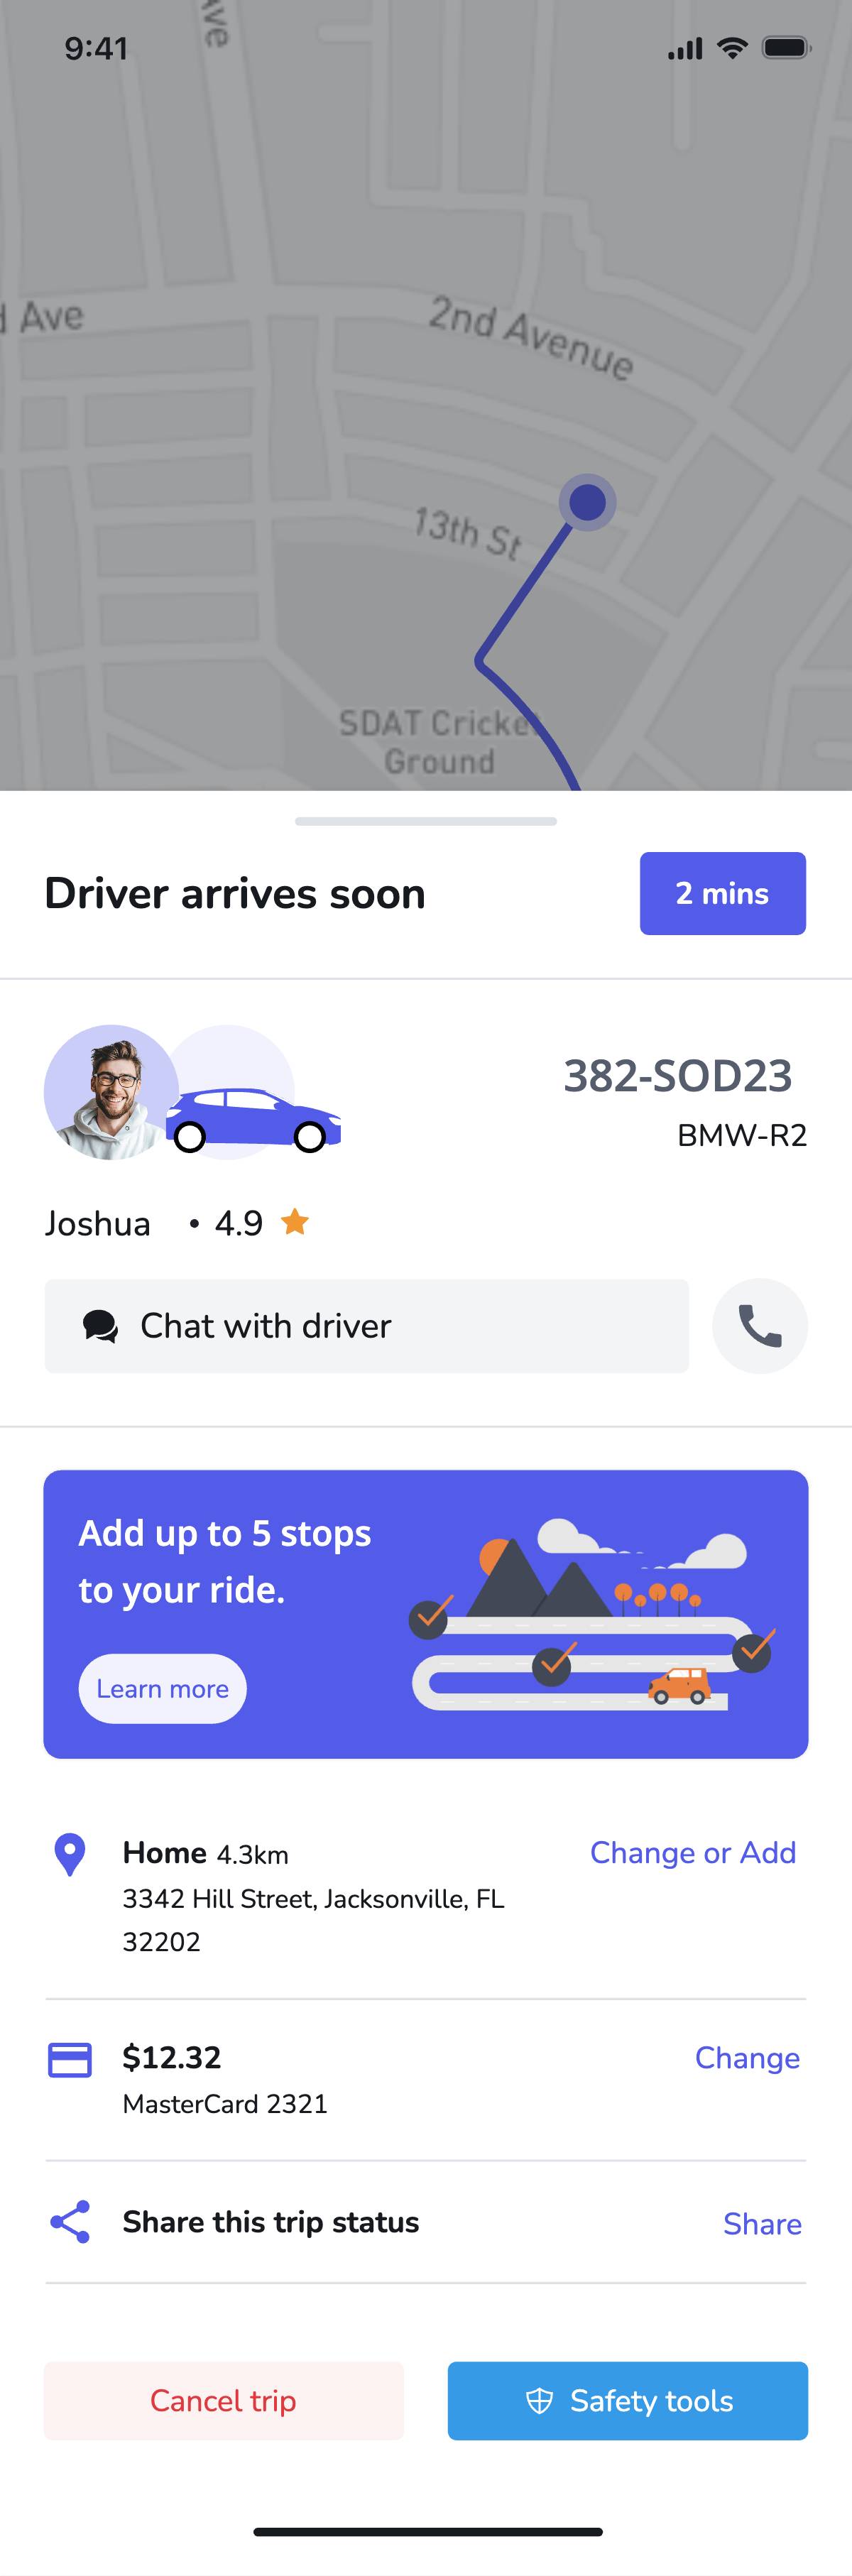 Ride booking - Ride details